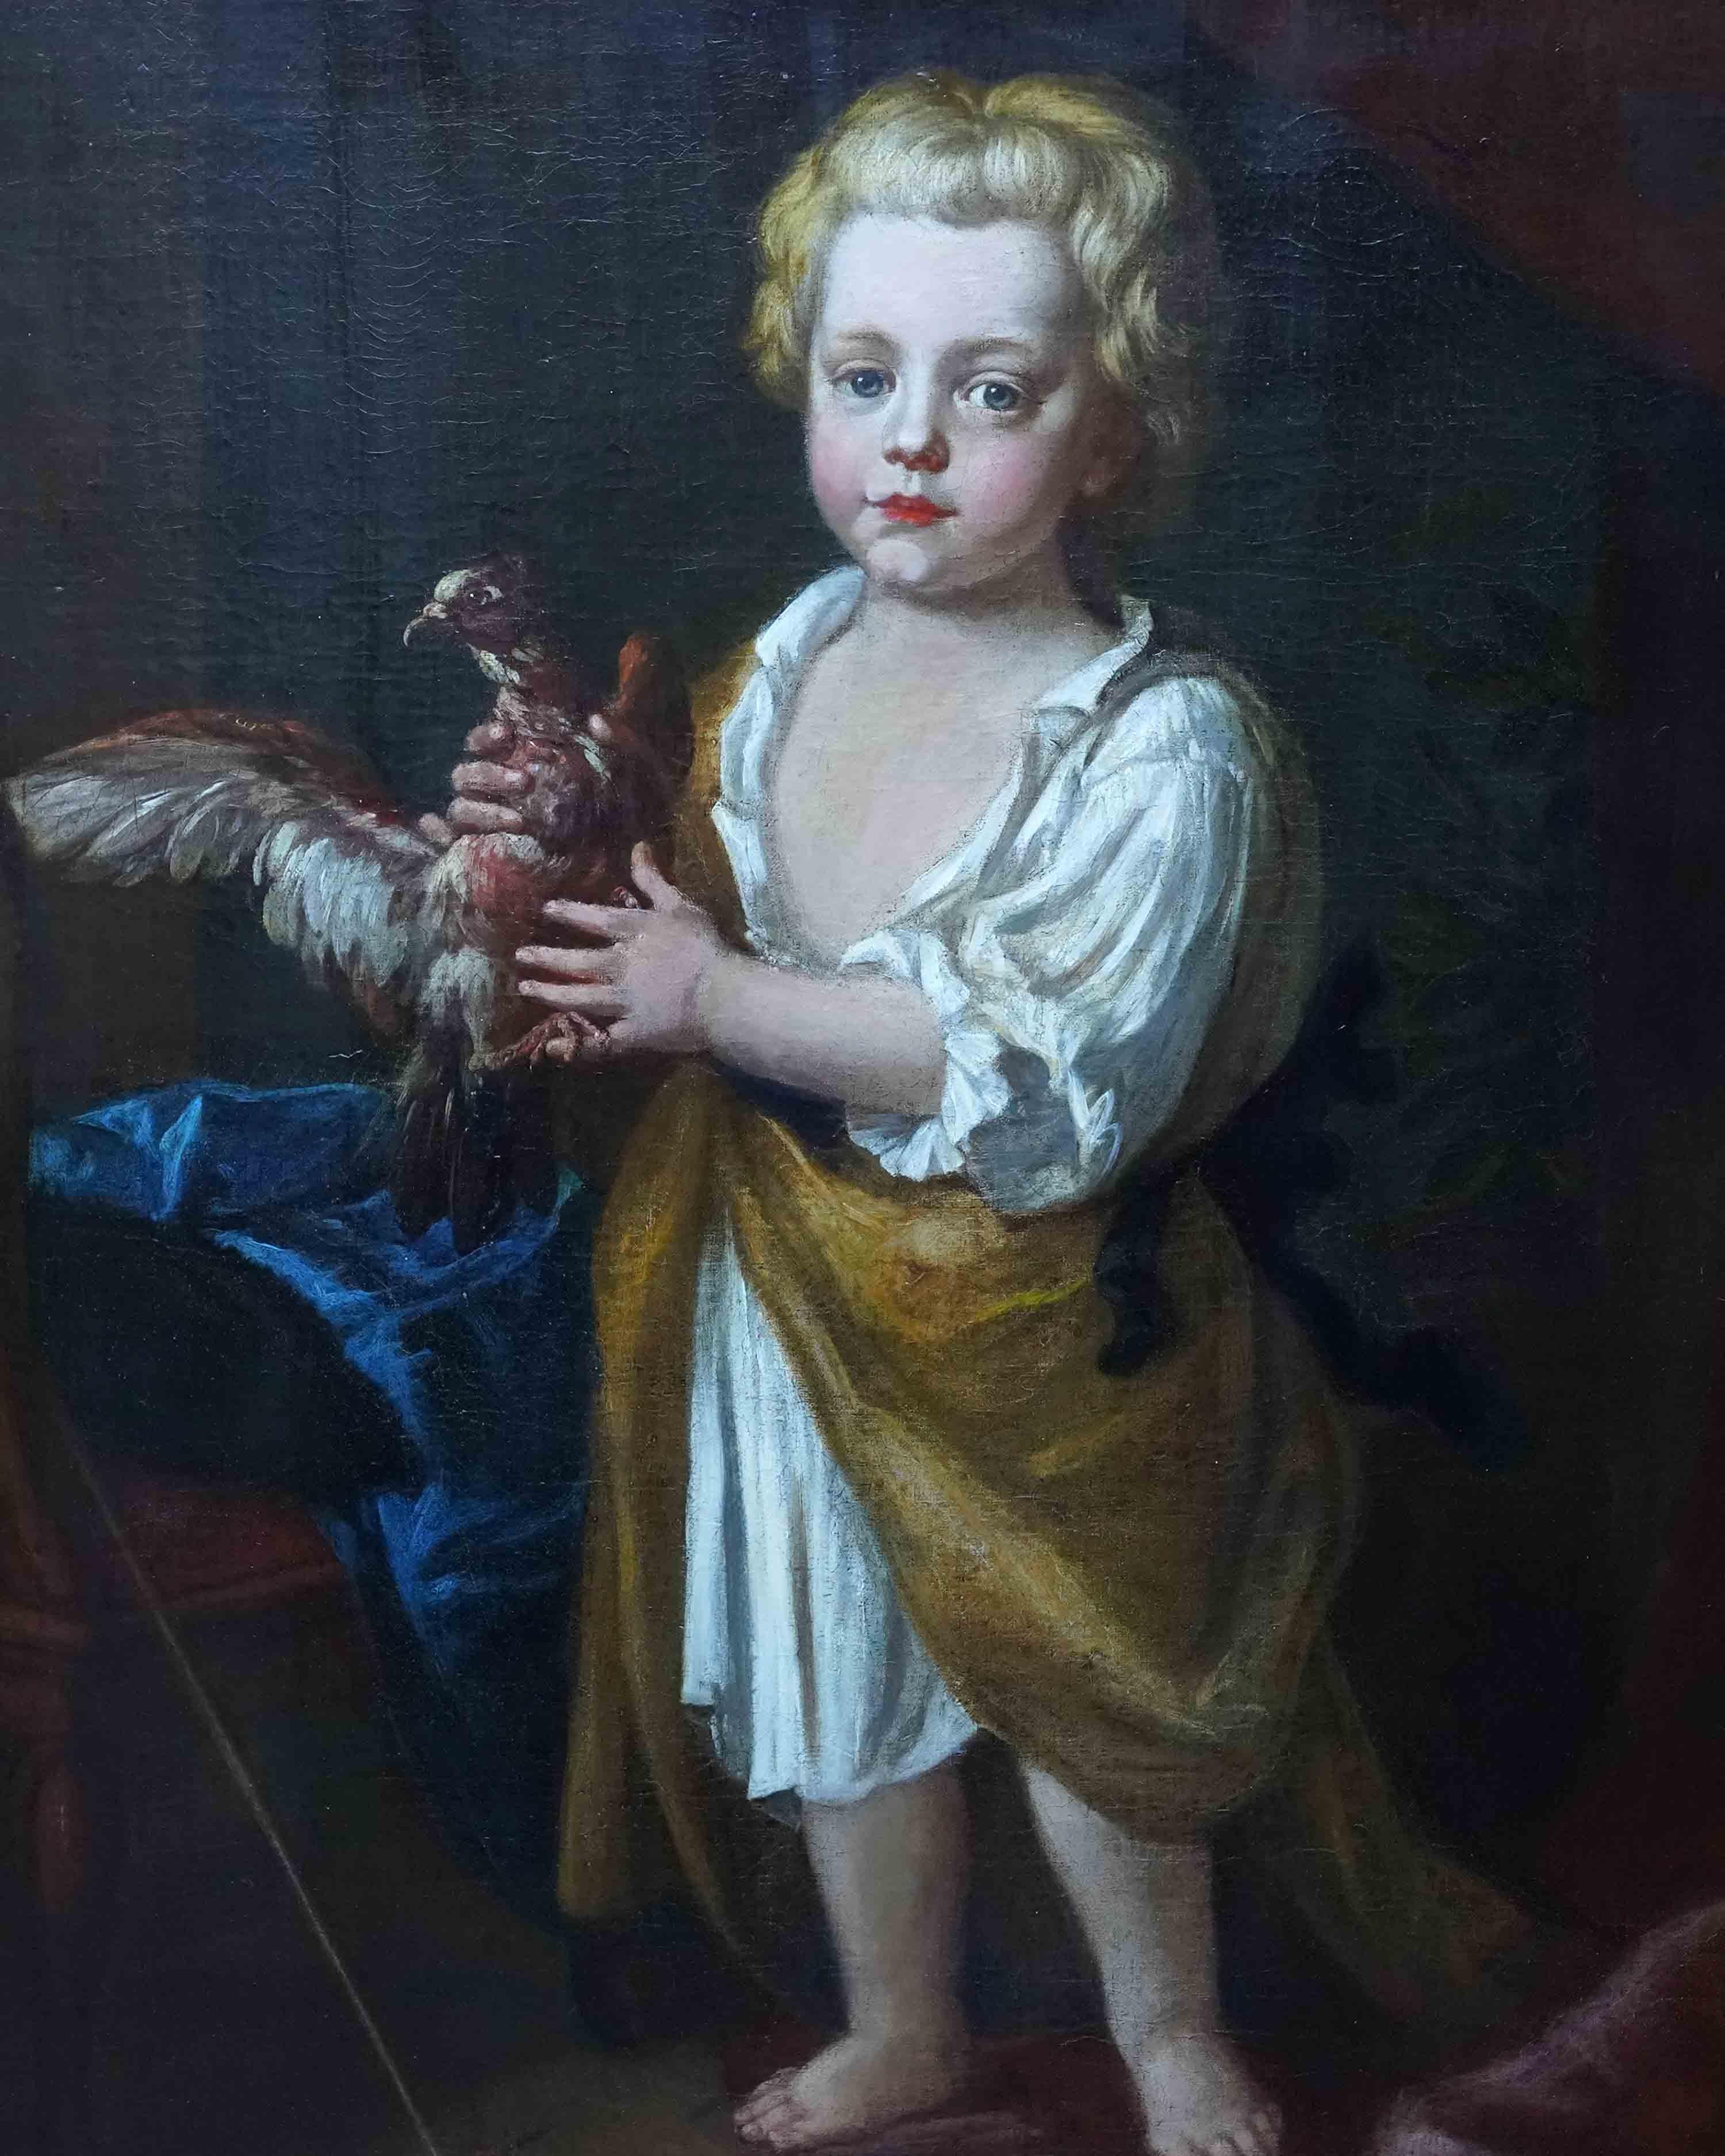 Portrait of a Boy with Bird - British 17th century art Old Master oil painting For Sale 6